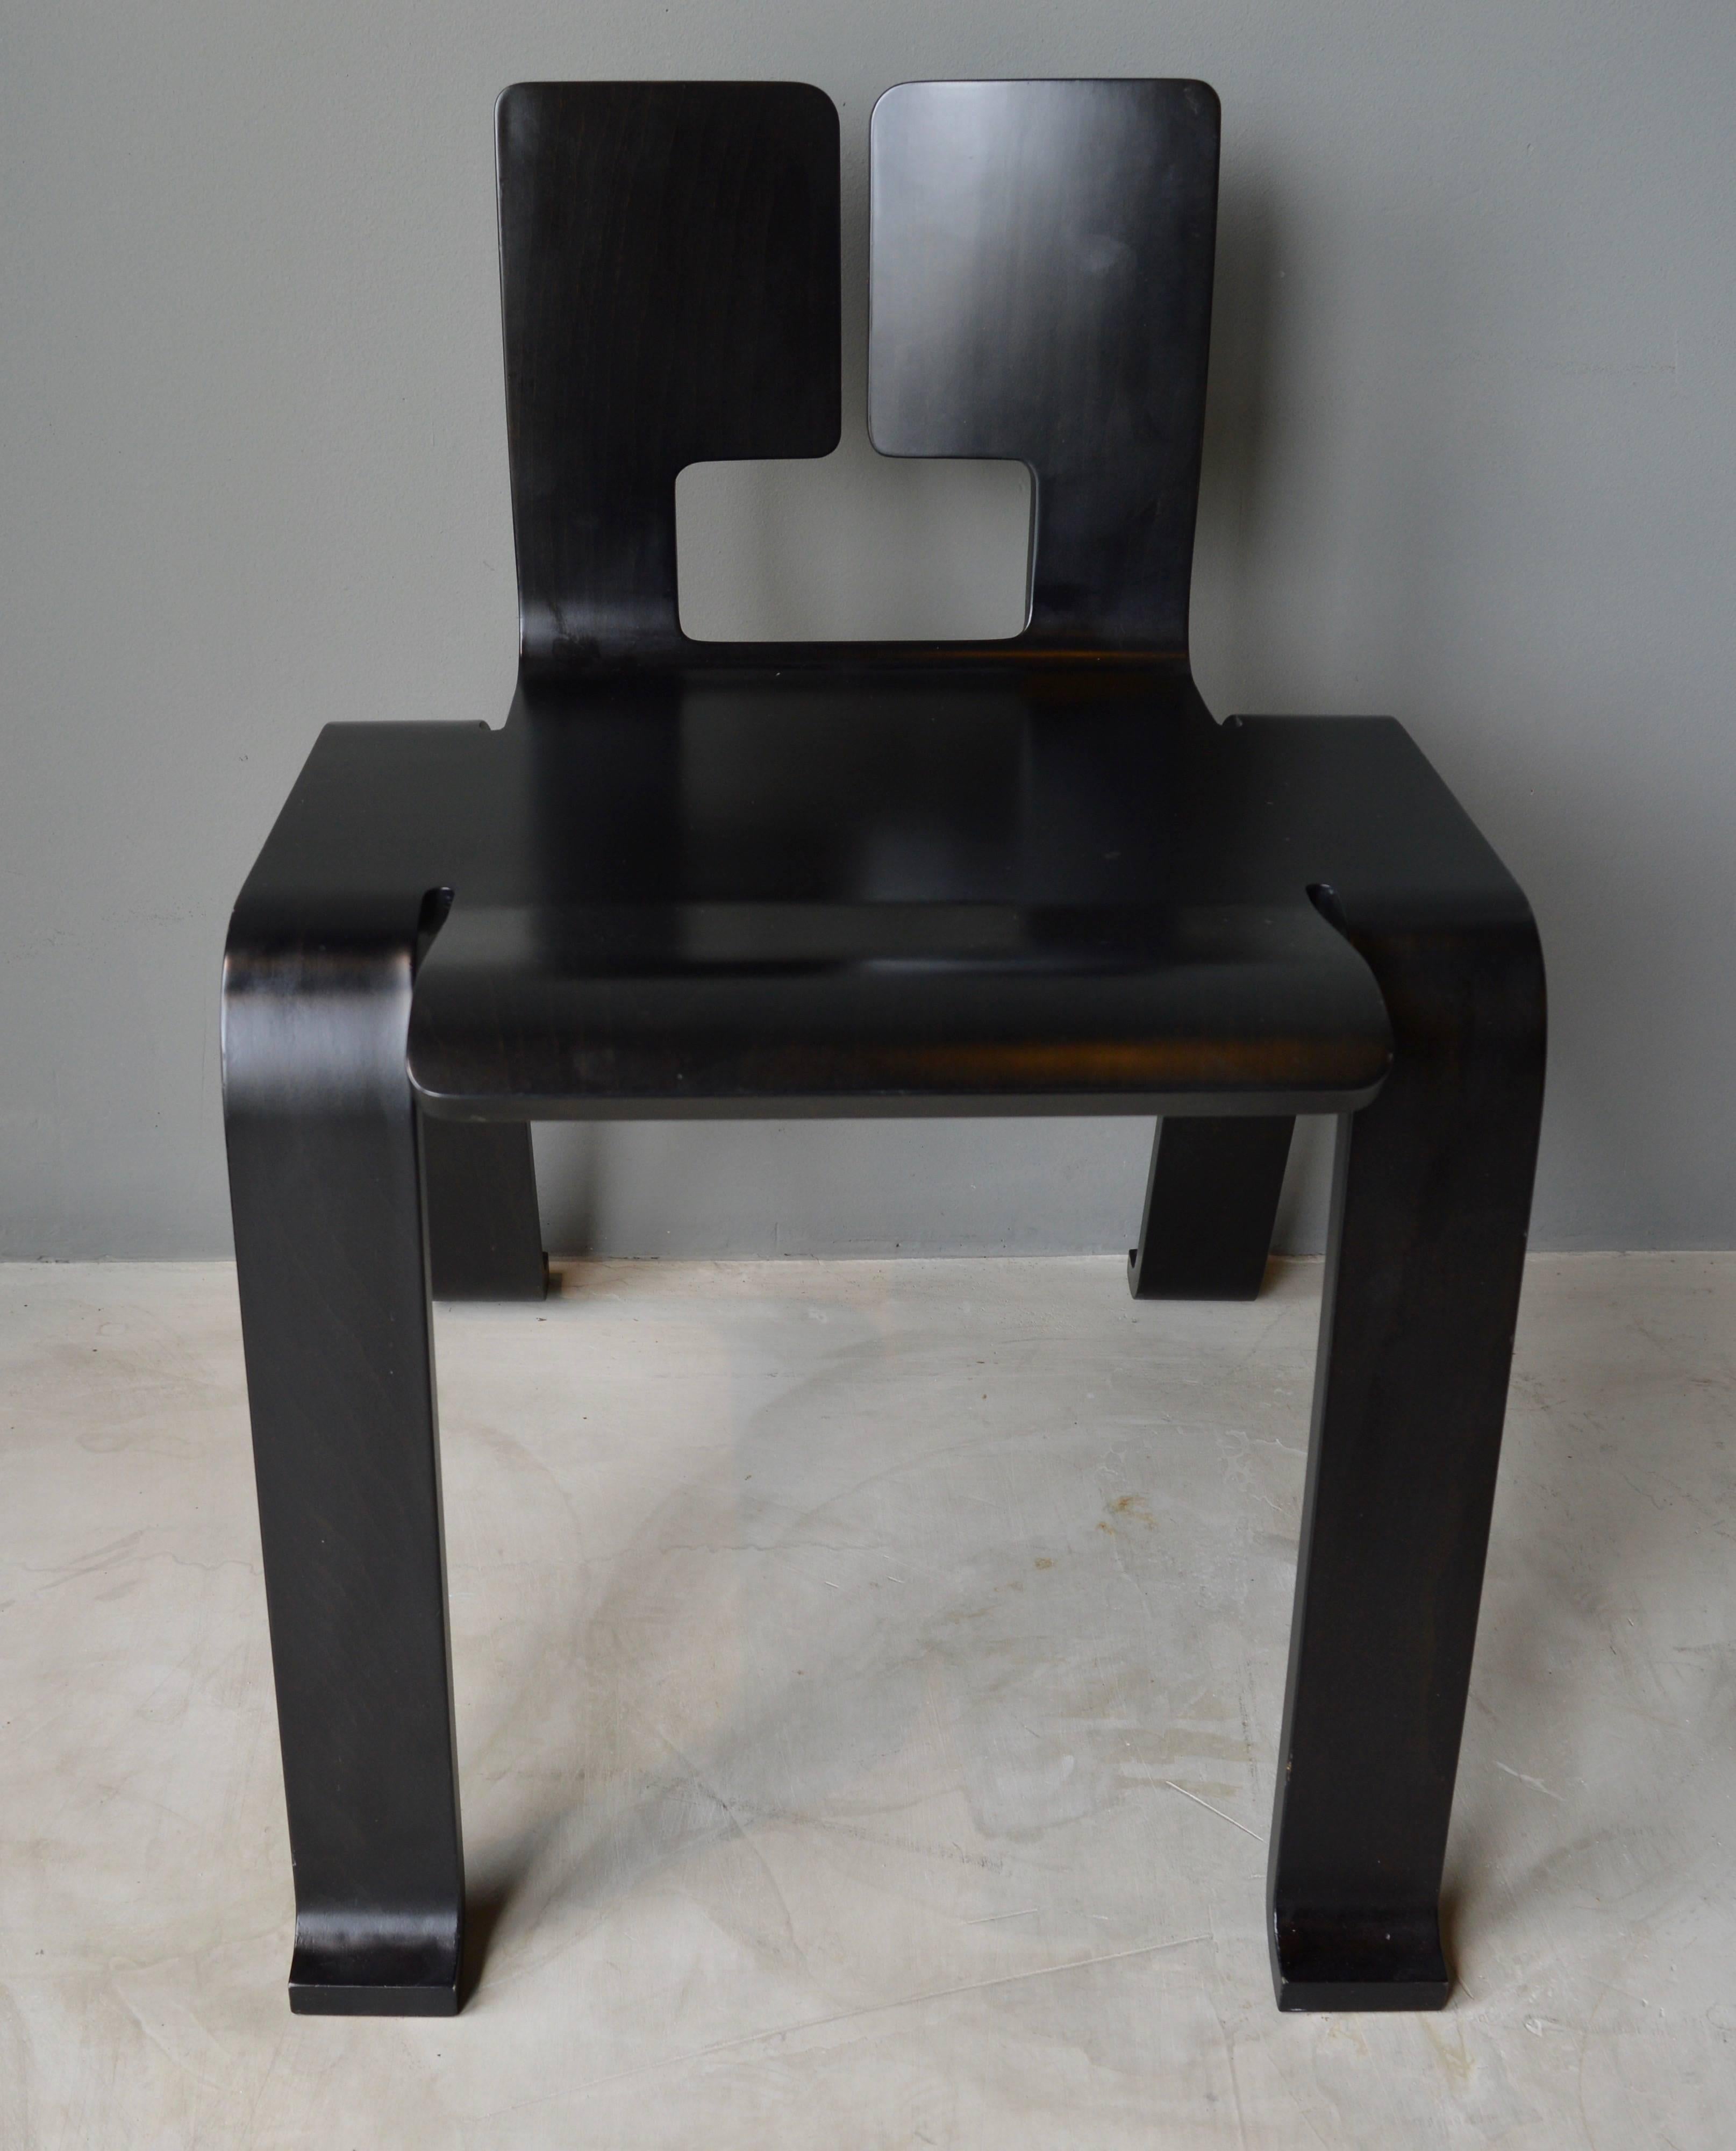 Artistic ebony wooden chair designed by Charlotte Perriand. Reproduced by Cassina. Unknown year on the chair. Lightweight chair with graceful folds, resembles origami and was created in Japan in 1954 for the Synthèse des Arts exhibition. Excellent